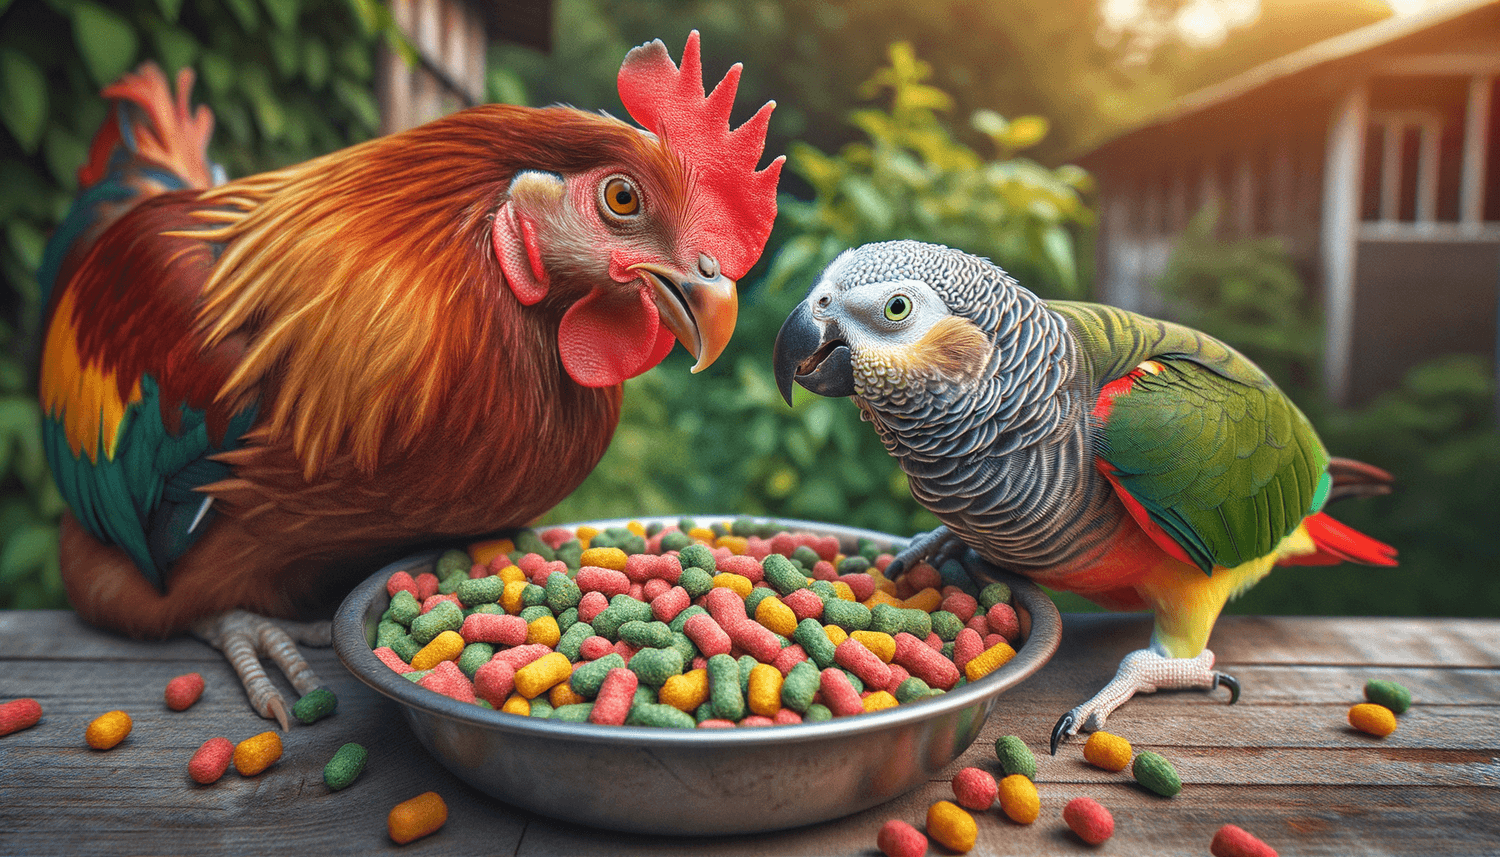 Can Chickens Eat Parrot Food?